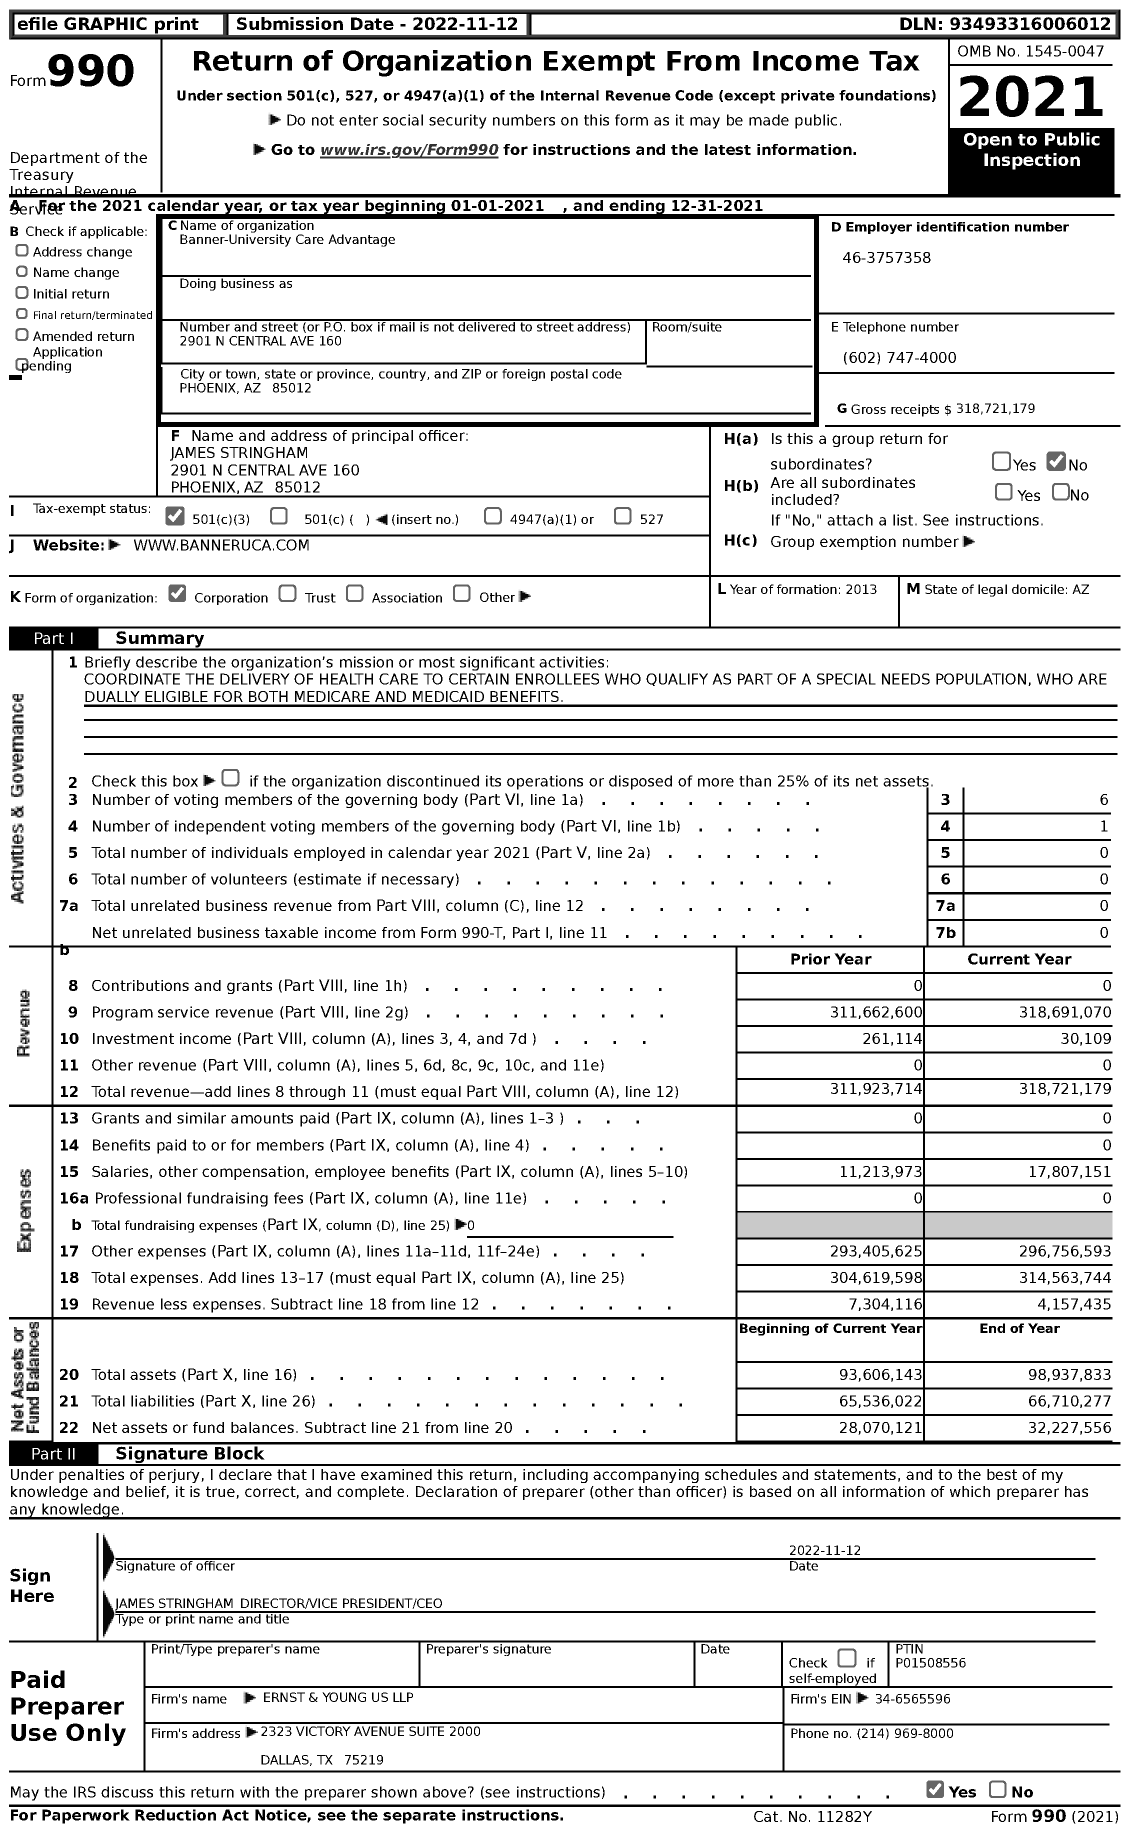 Image of first page of 2021 Form 990 for Banner-University Care Advantage